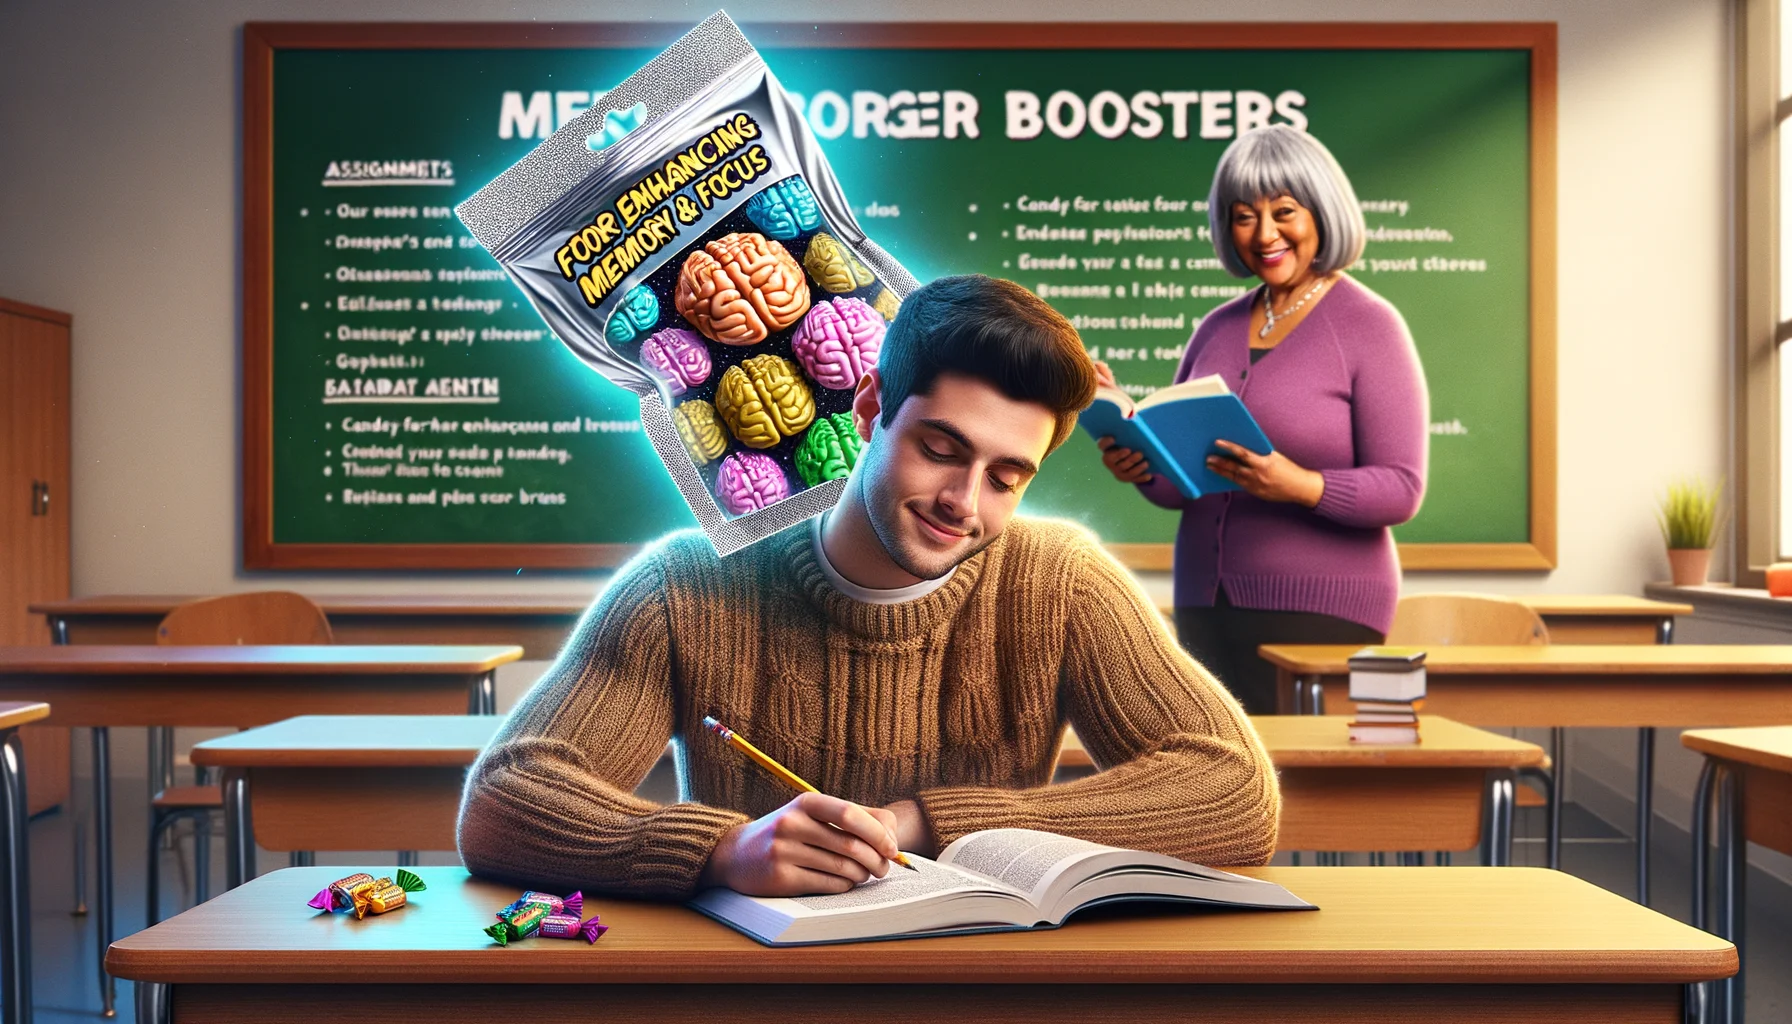 Create a comical yet realistic image of a study scenario embodying perfection. The scene displays a Hispanic student and a Black teacher in a neat, well-lit classroom. The student is engrossed in a thick book, while the teacher marks assignments with a content smile. Amidst this, an open packet of 'Candy for Enhancing Memory and Focus' stands out on the student's desk, with colourful candies popping out, each shaped like a brain. Their shimmering wrapper is grabbing everyone's attention. In the background, there's a chalkboard displaying 'Memory Boosters' with candy packets in place of the bullet points.